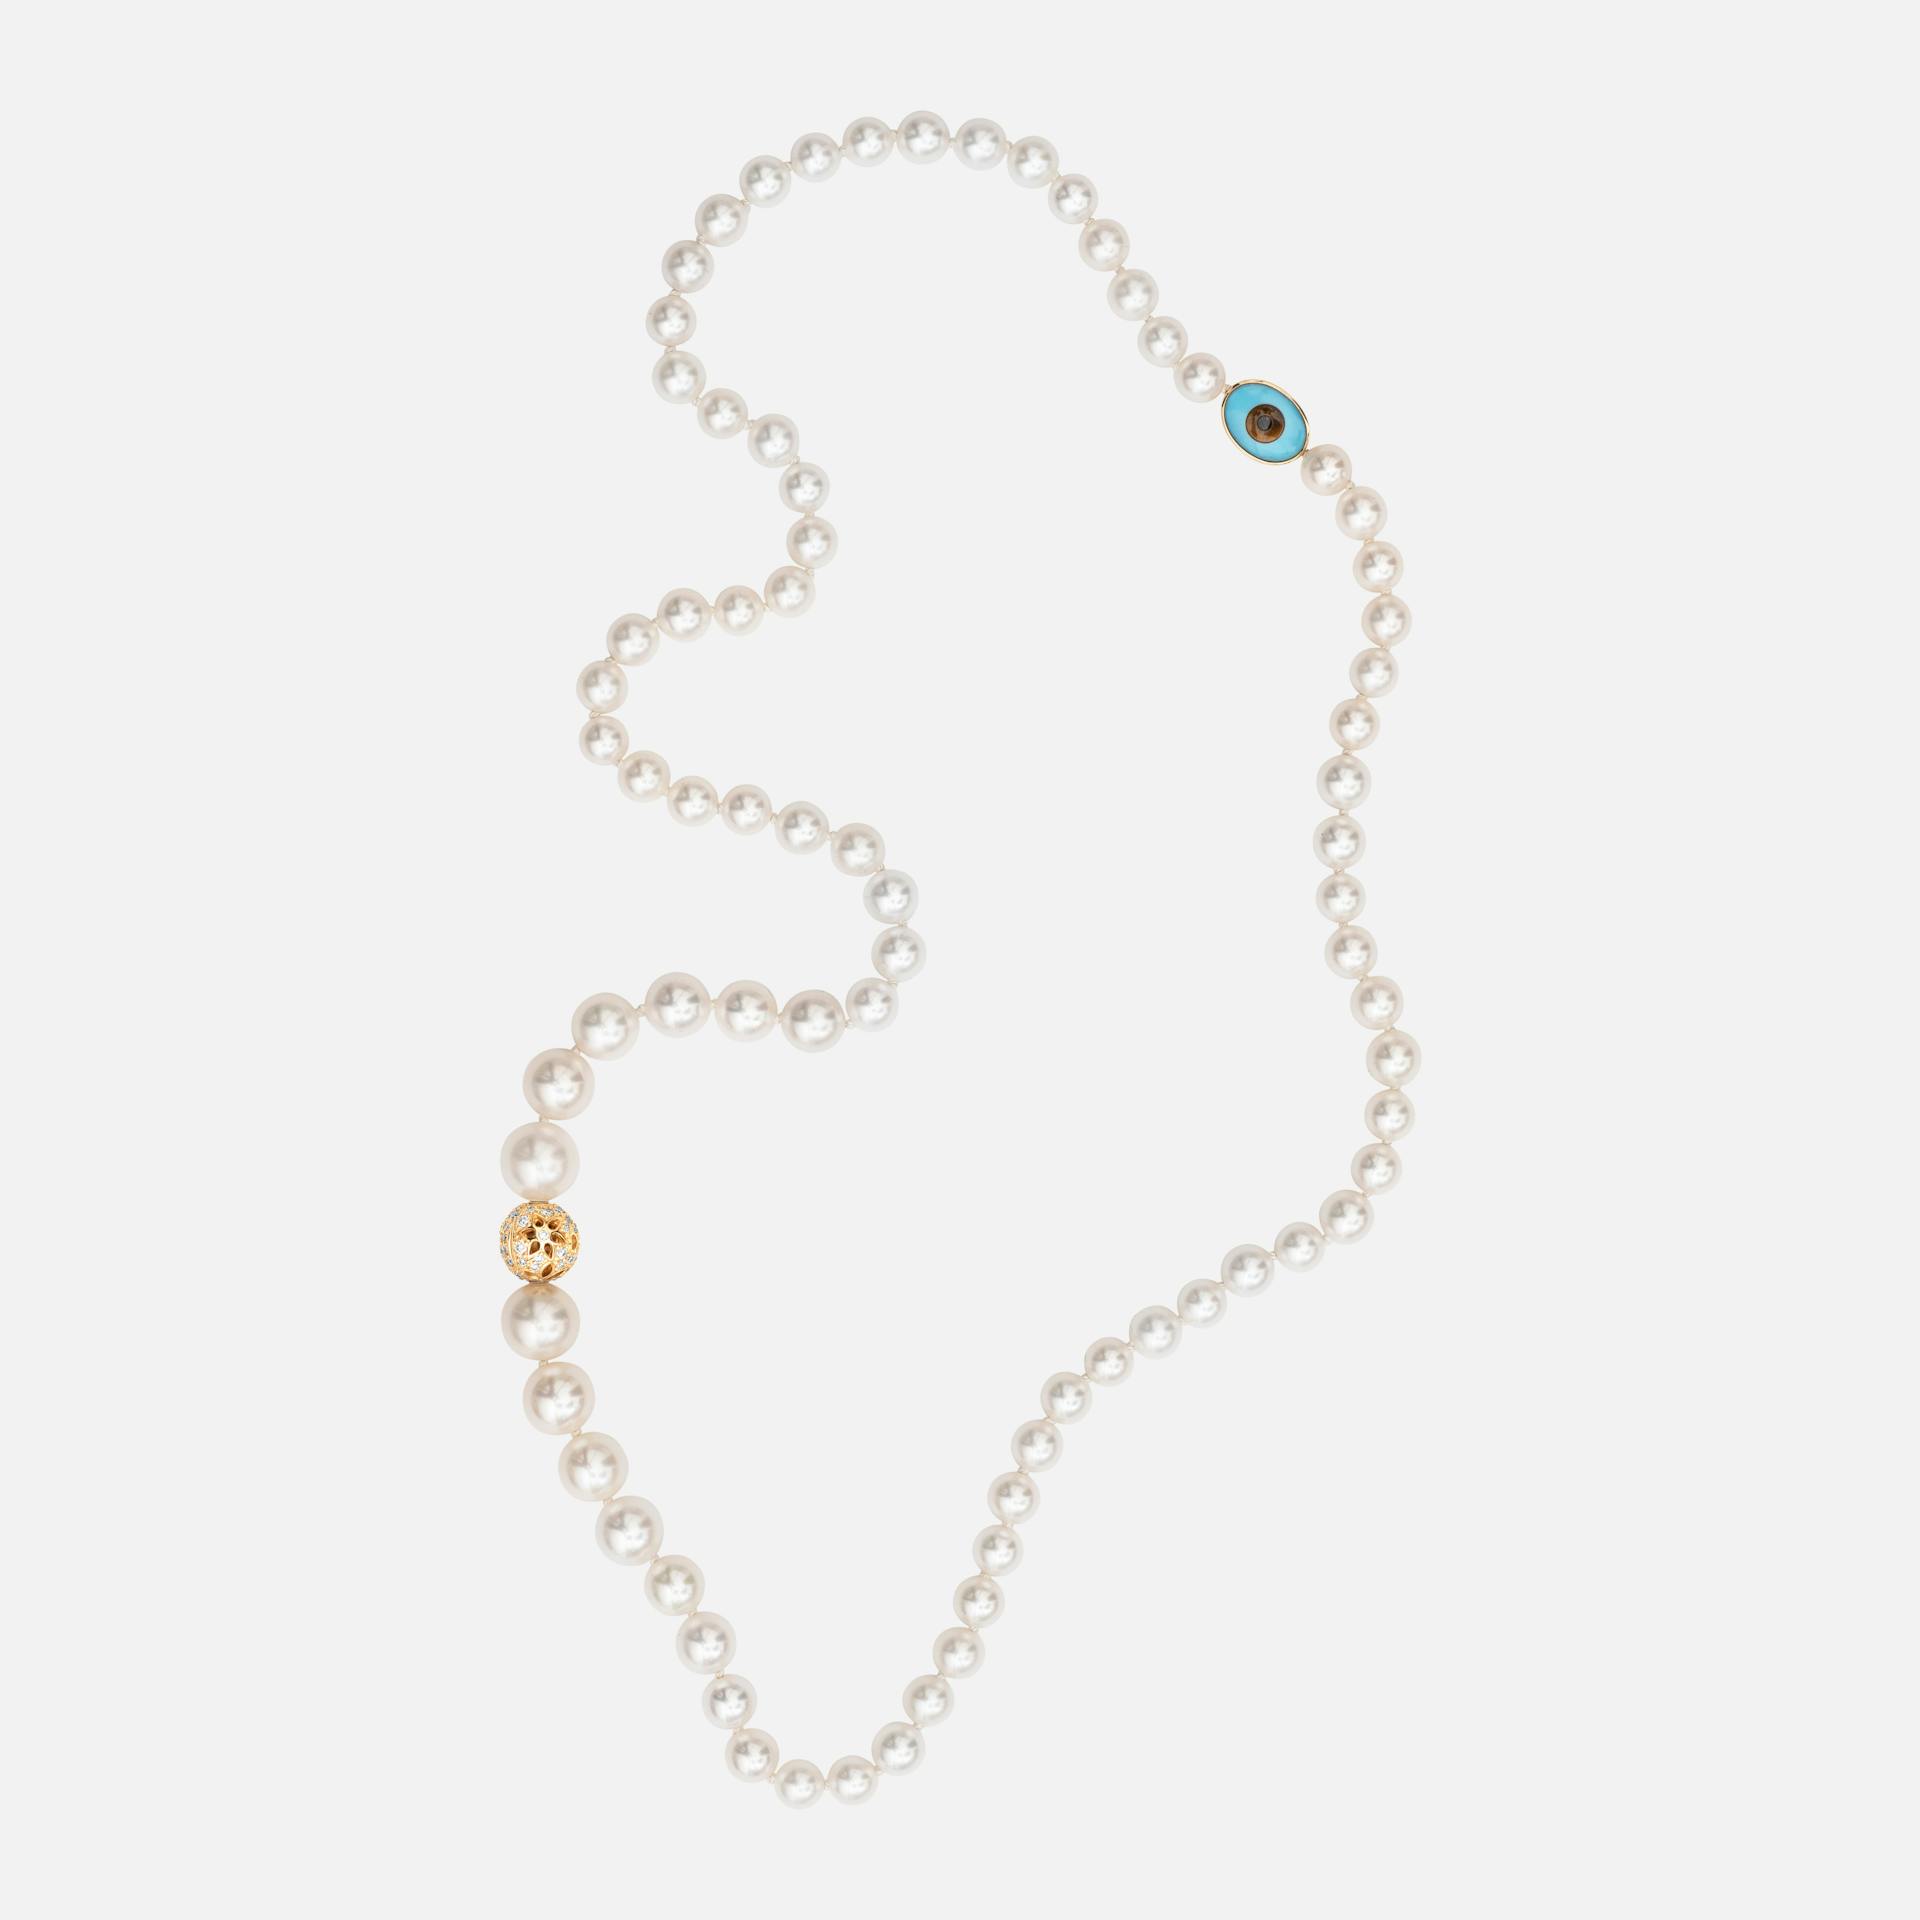 Bead collier without lock Freshwater pearls and evil eye with 18k gold setting